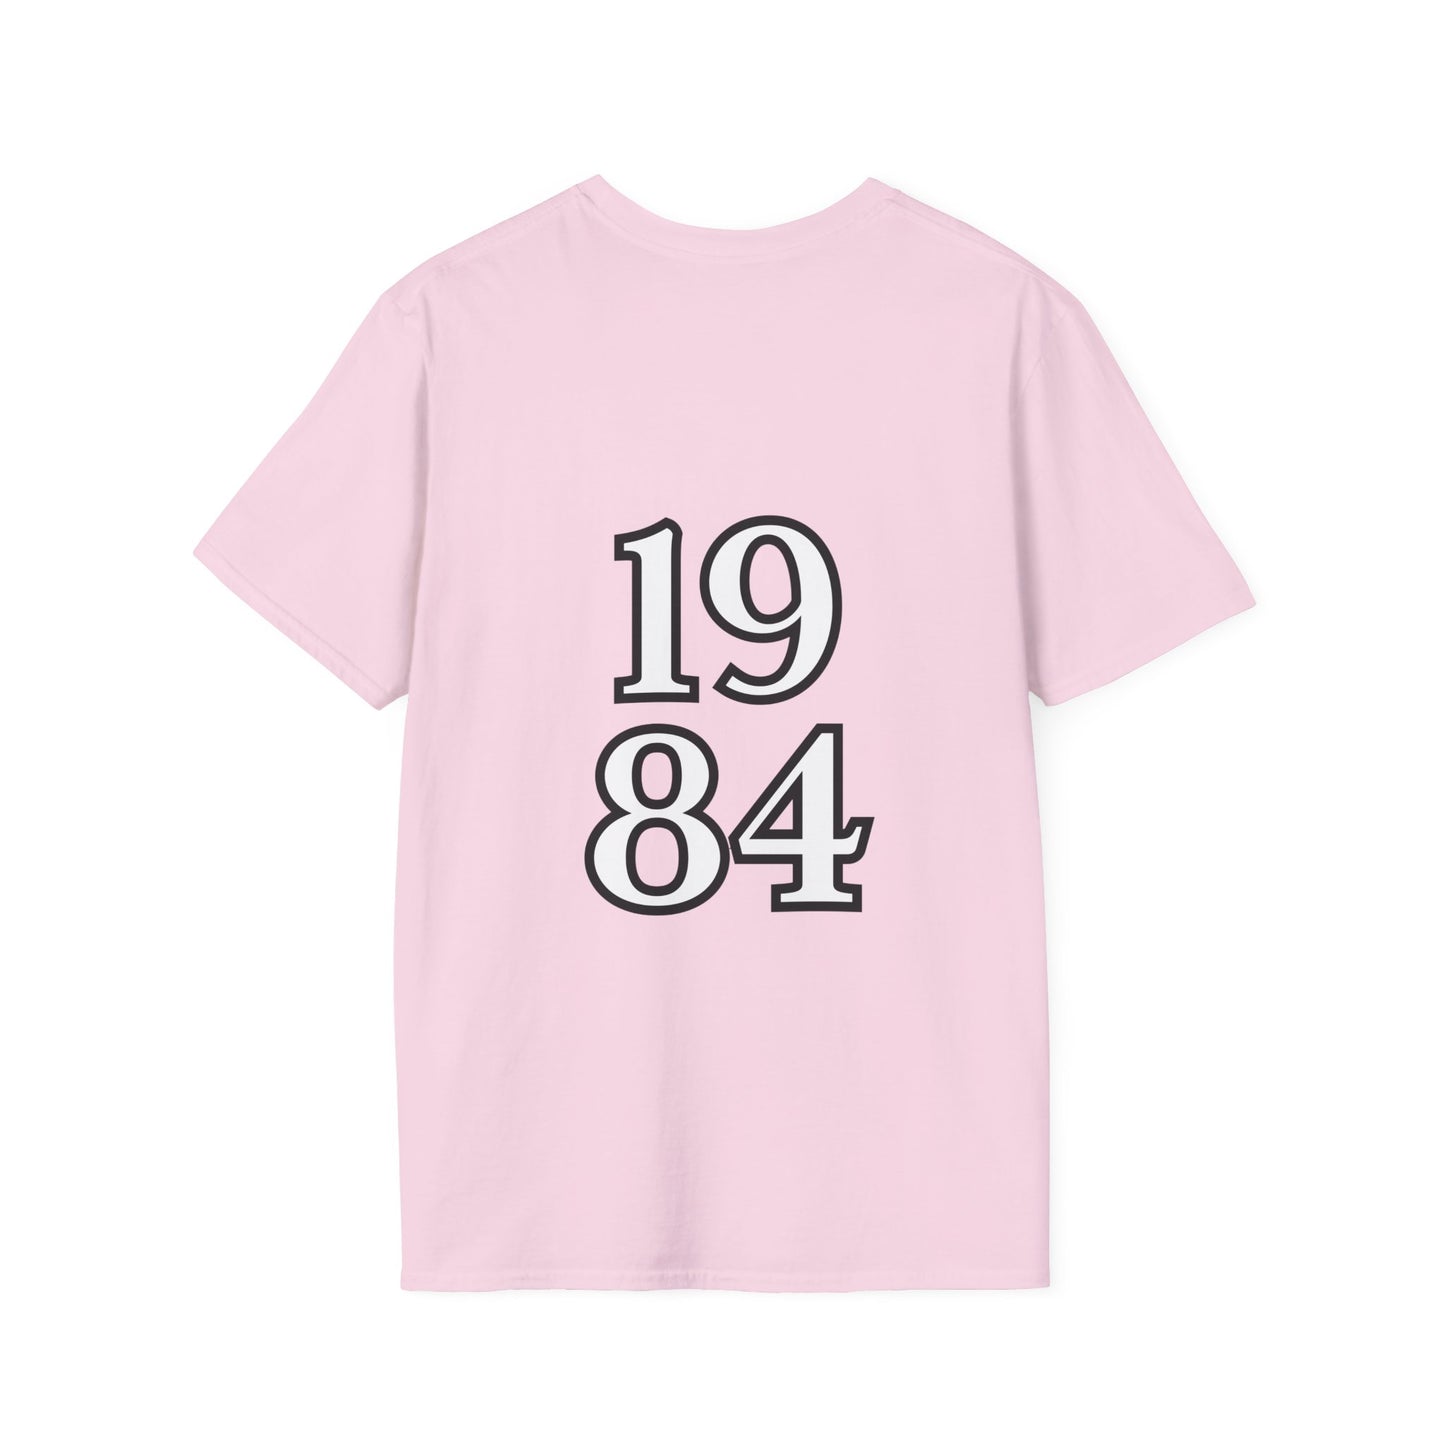 1984 x Years Collection - tee